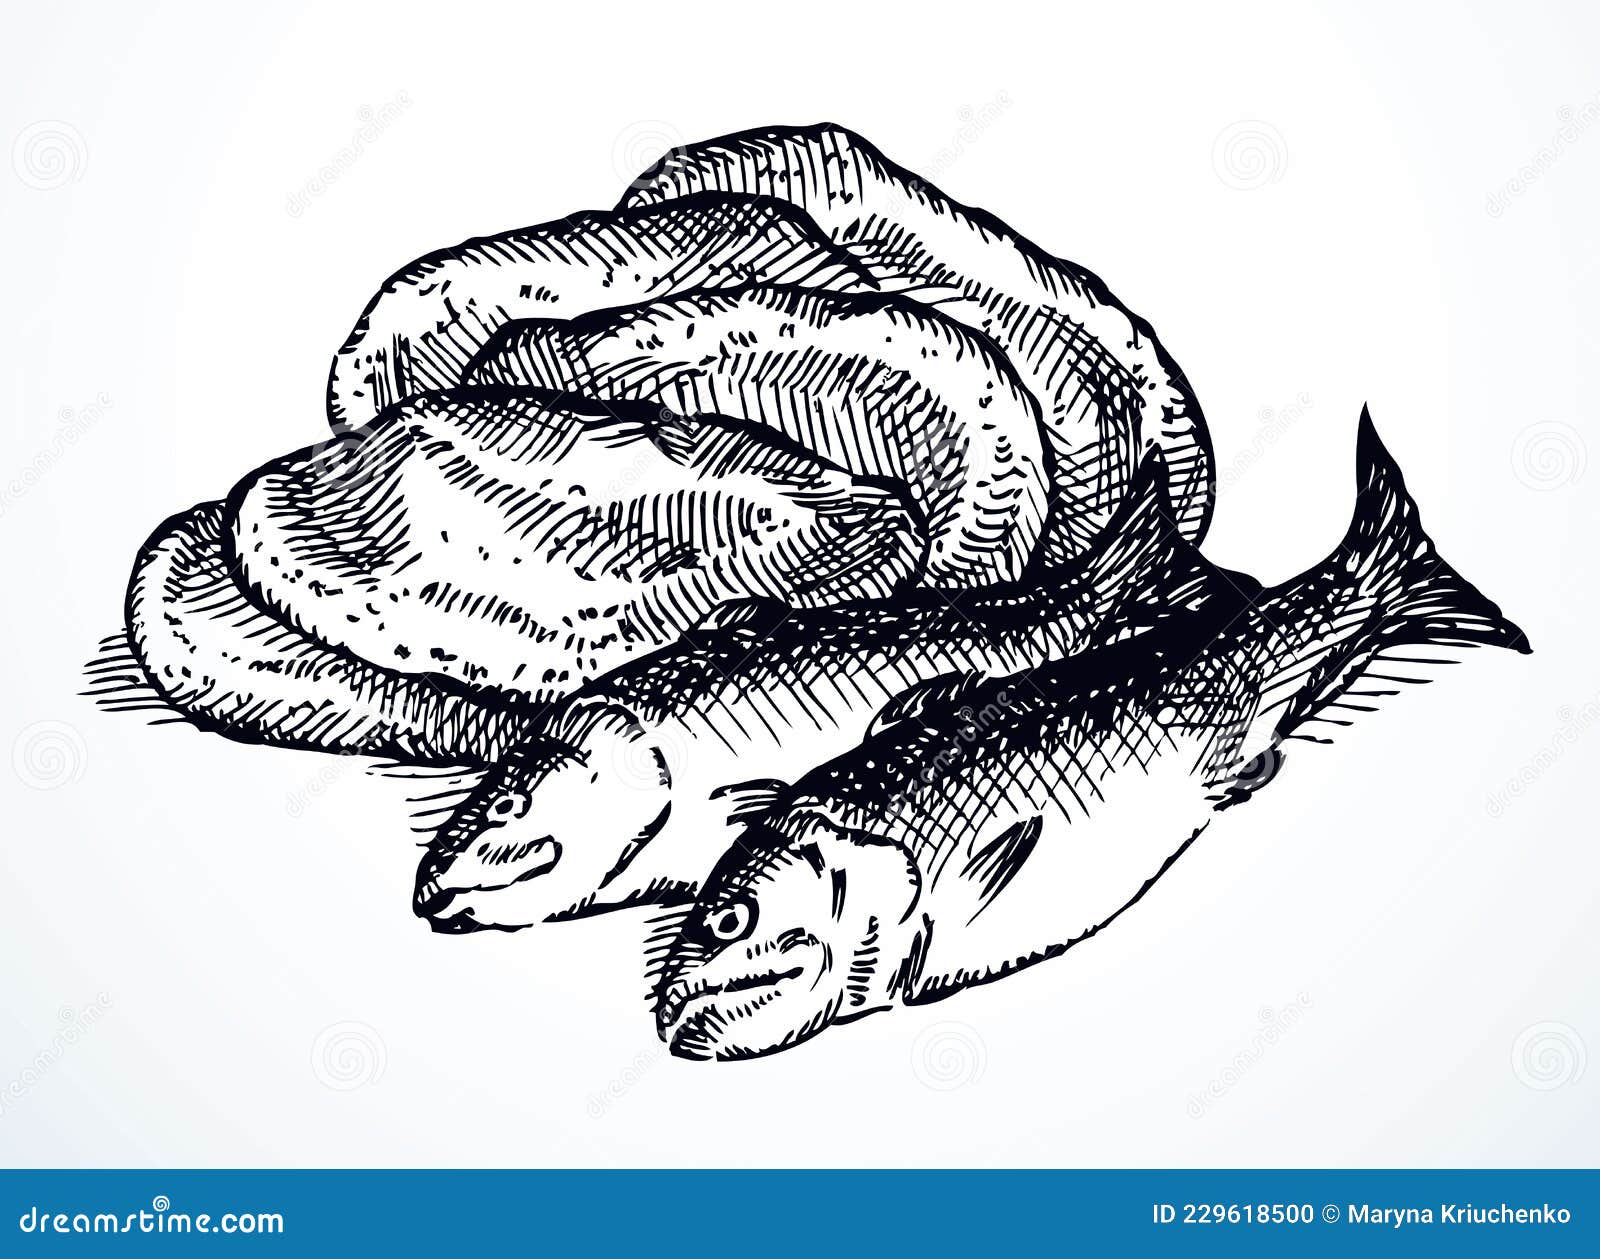 clipart loaves fishes